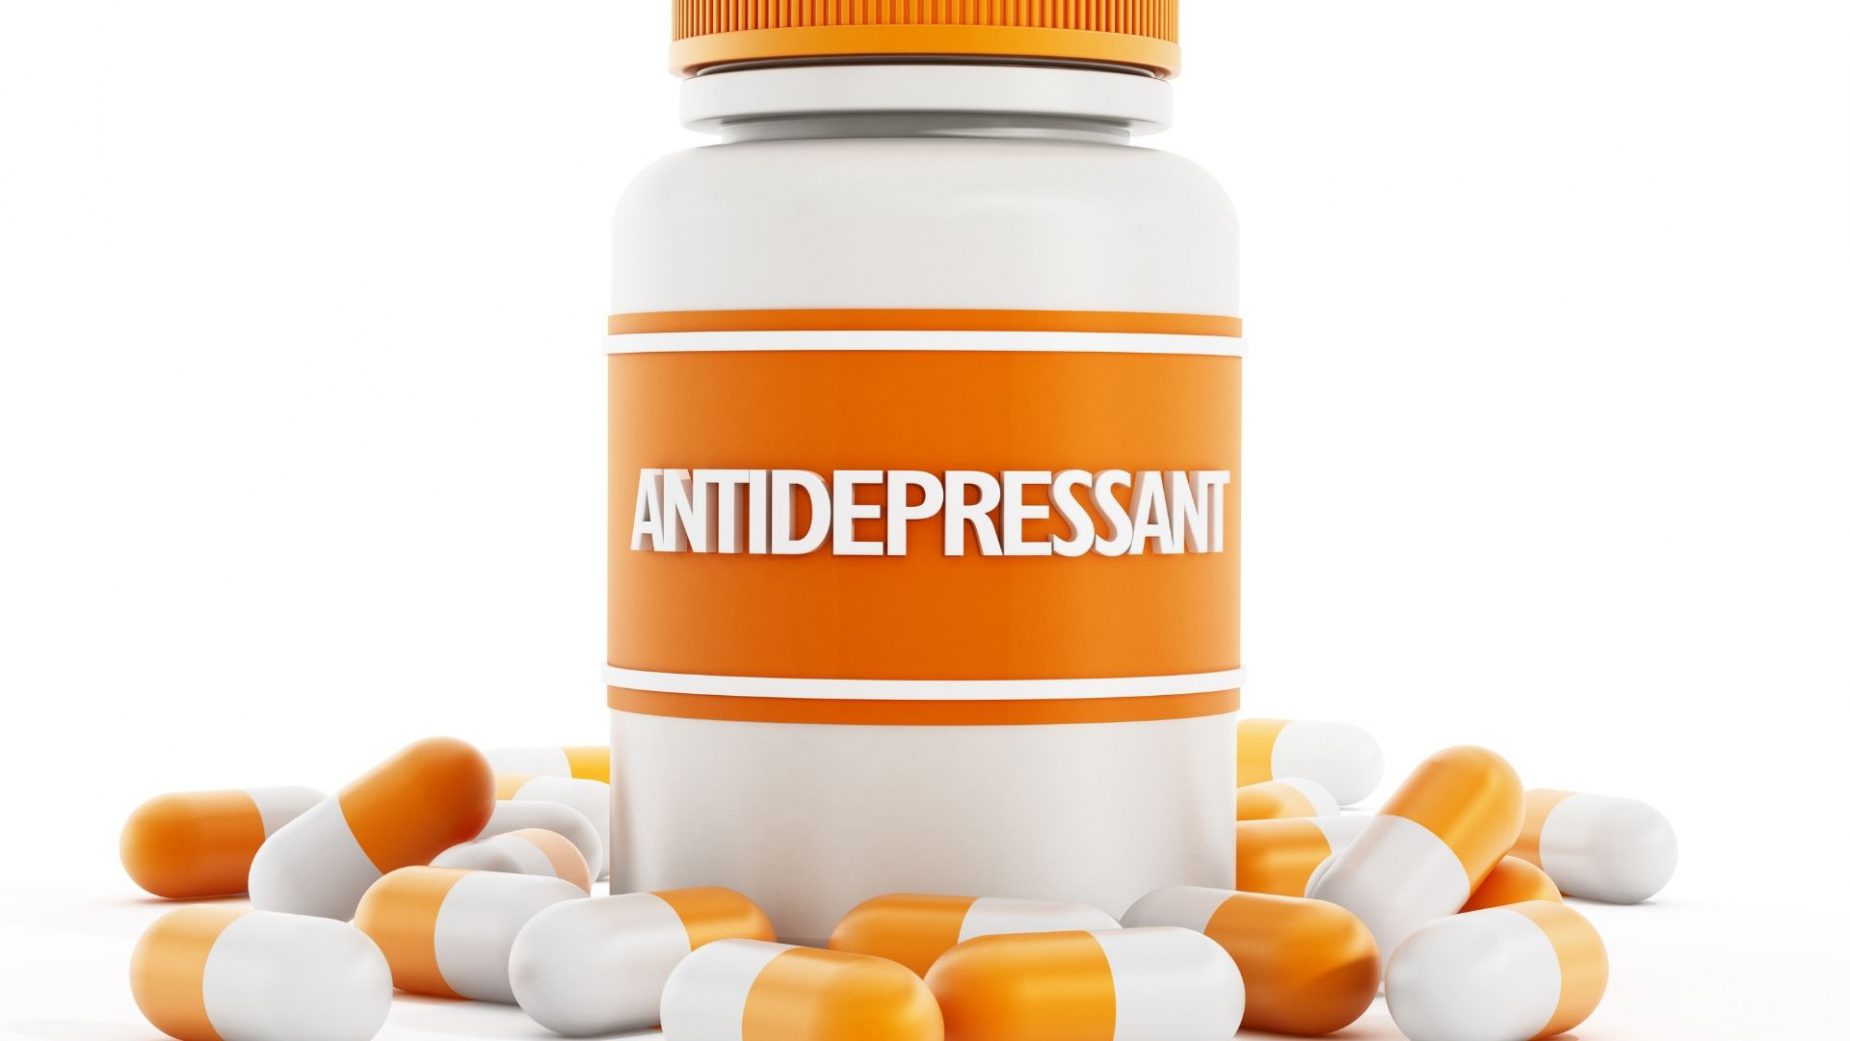 Global Antidepressants Market Overview And Prospects